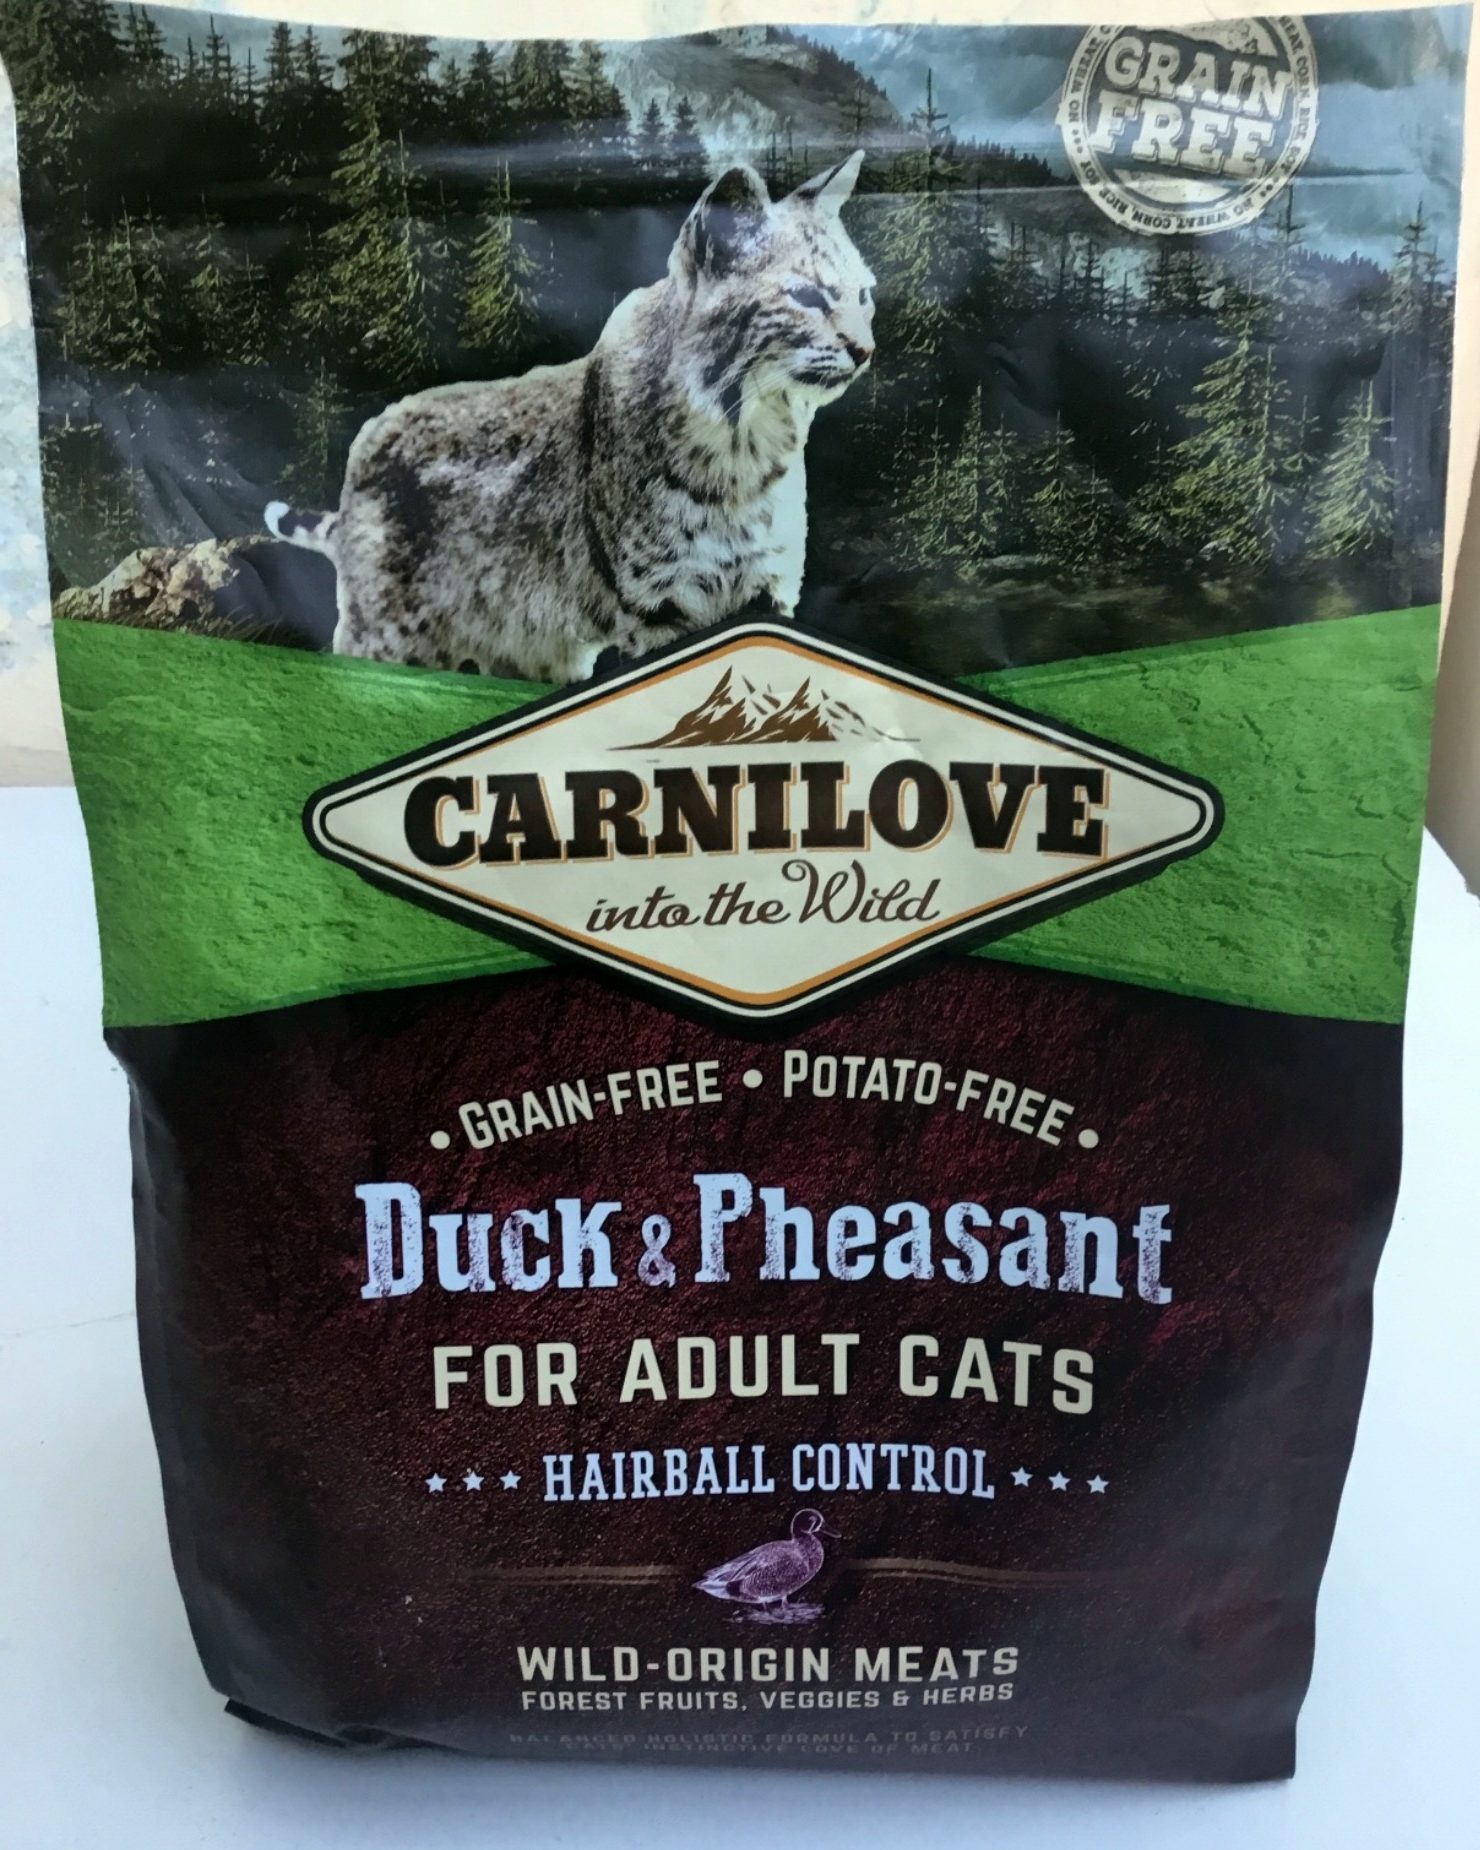 Duck and Pheasant for adult cats *** hairball control *** - Produit - fr